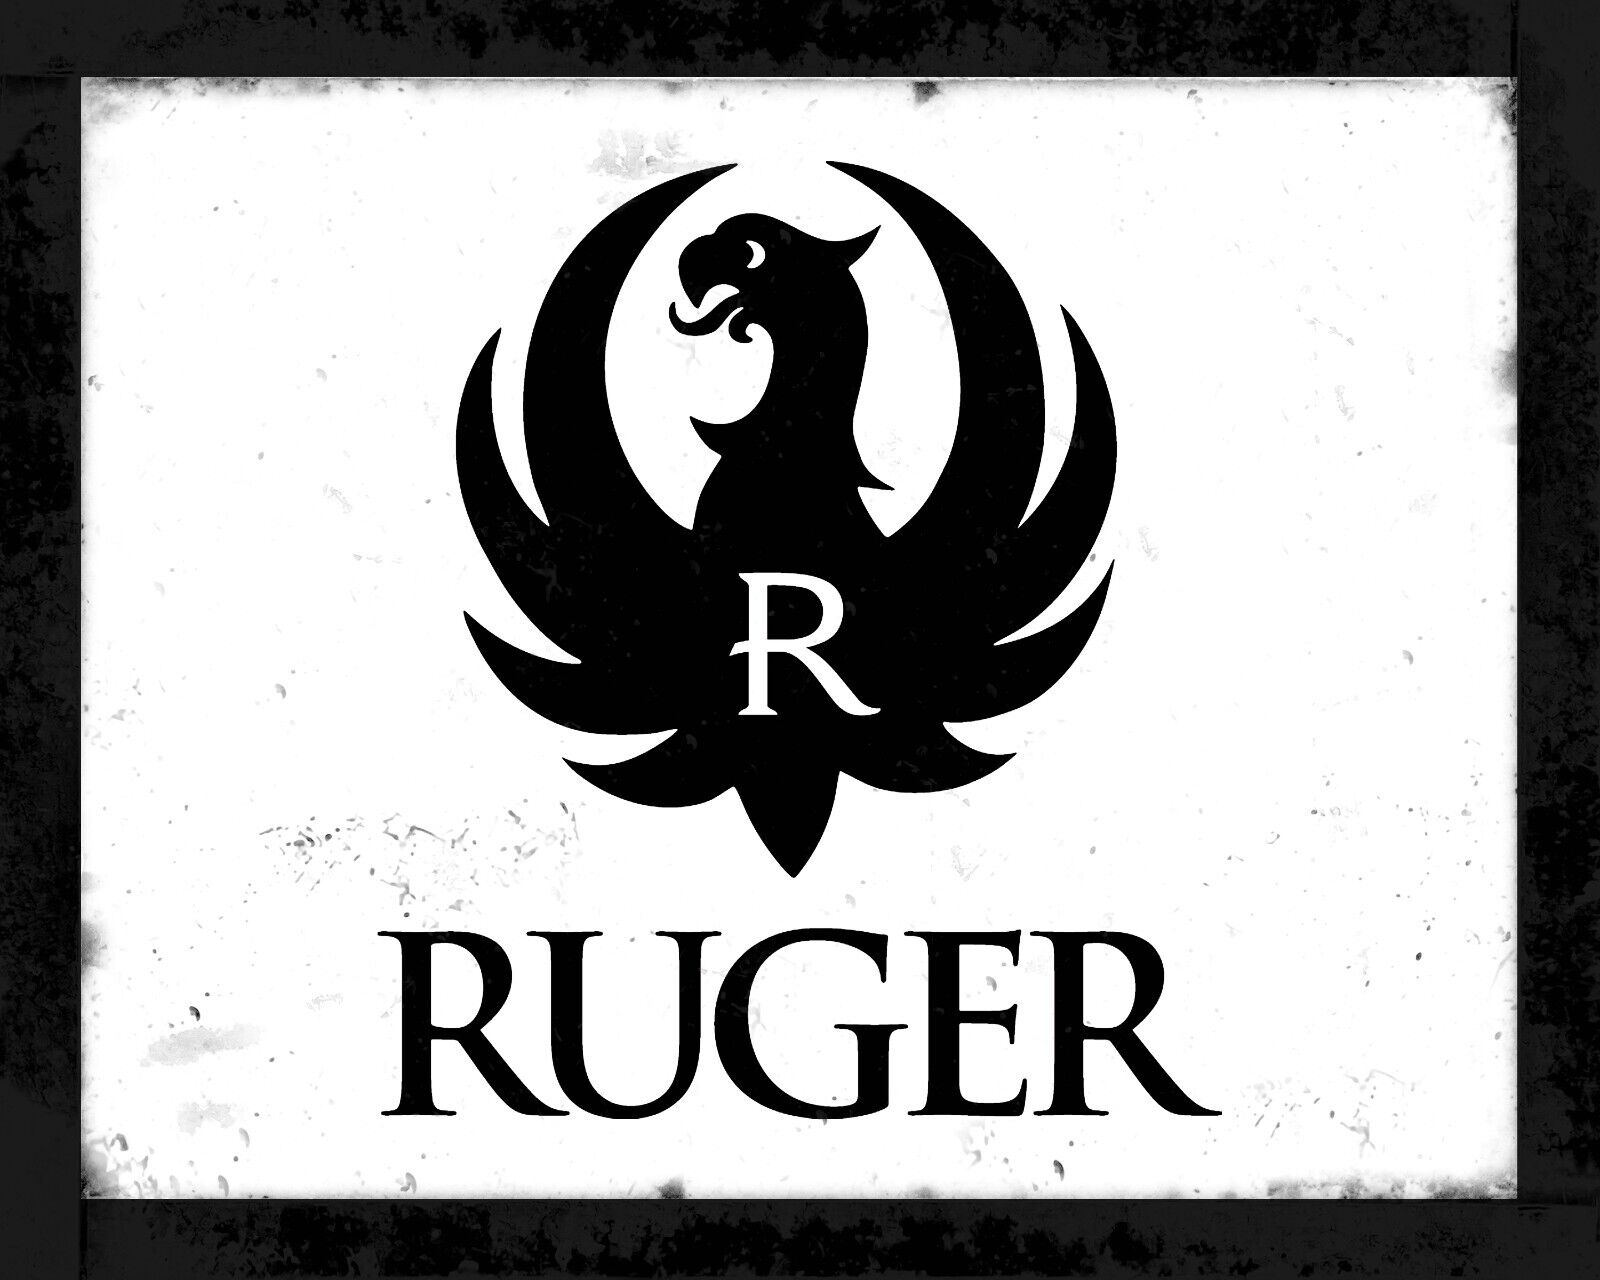 Ruger Firearms Black Phoenix 8x10 Rustic Vintage Style Tin Sign Metal Poster